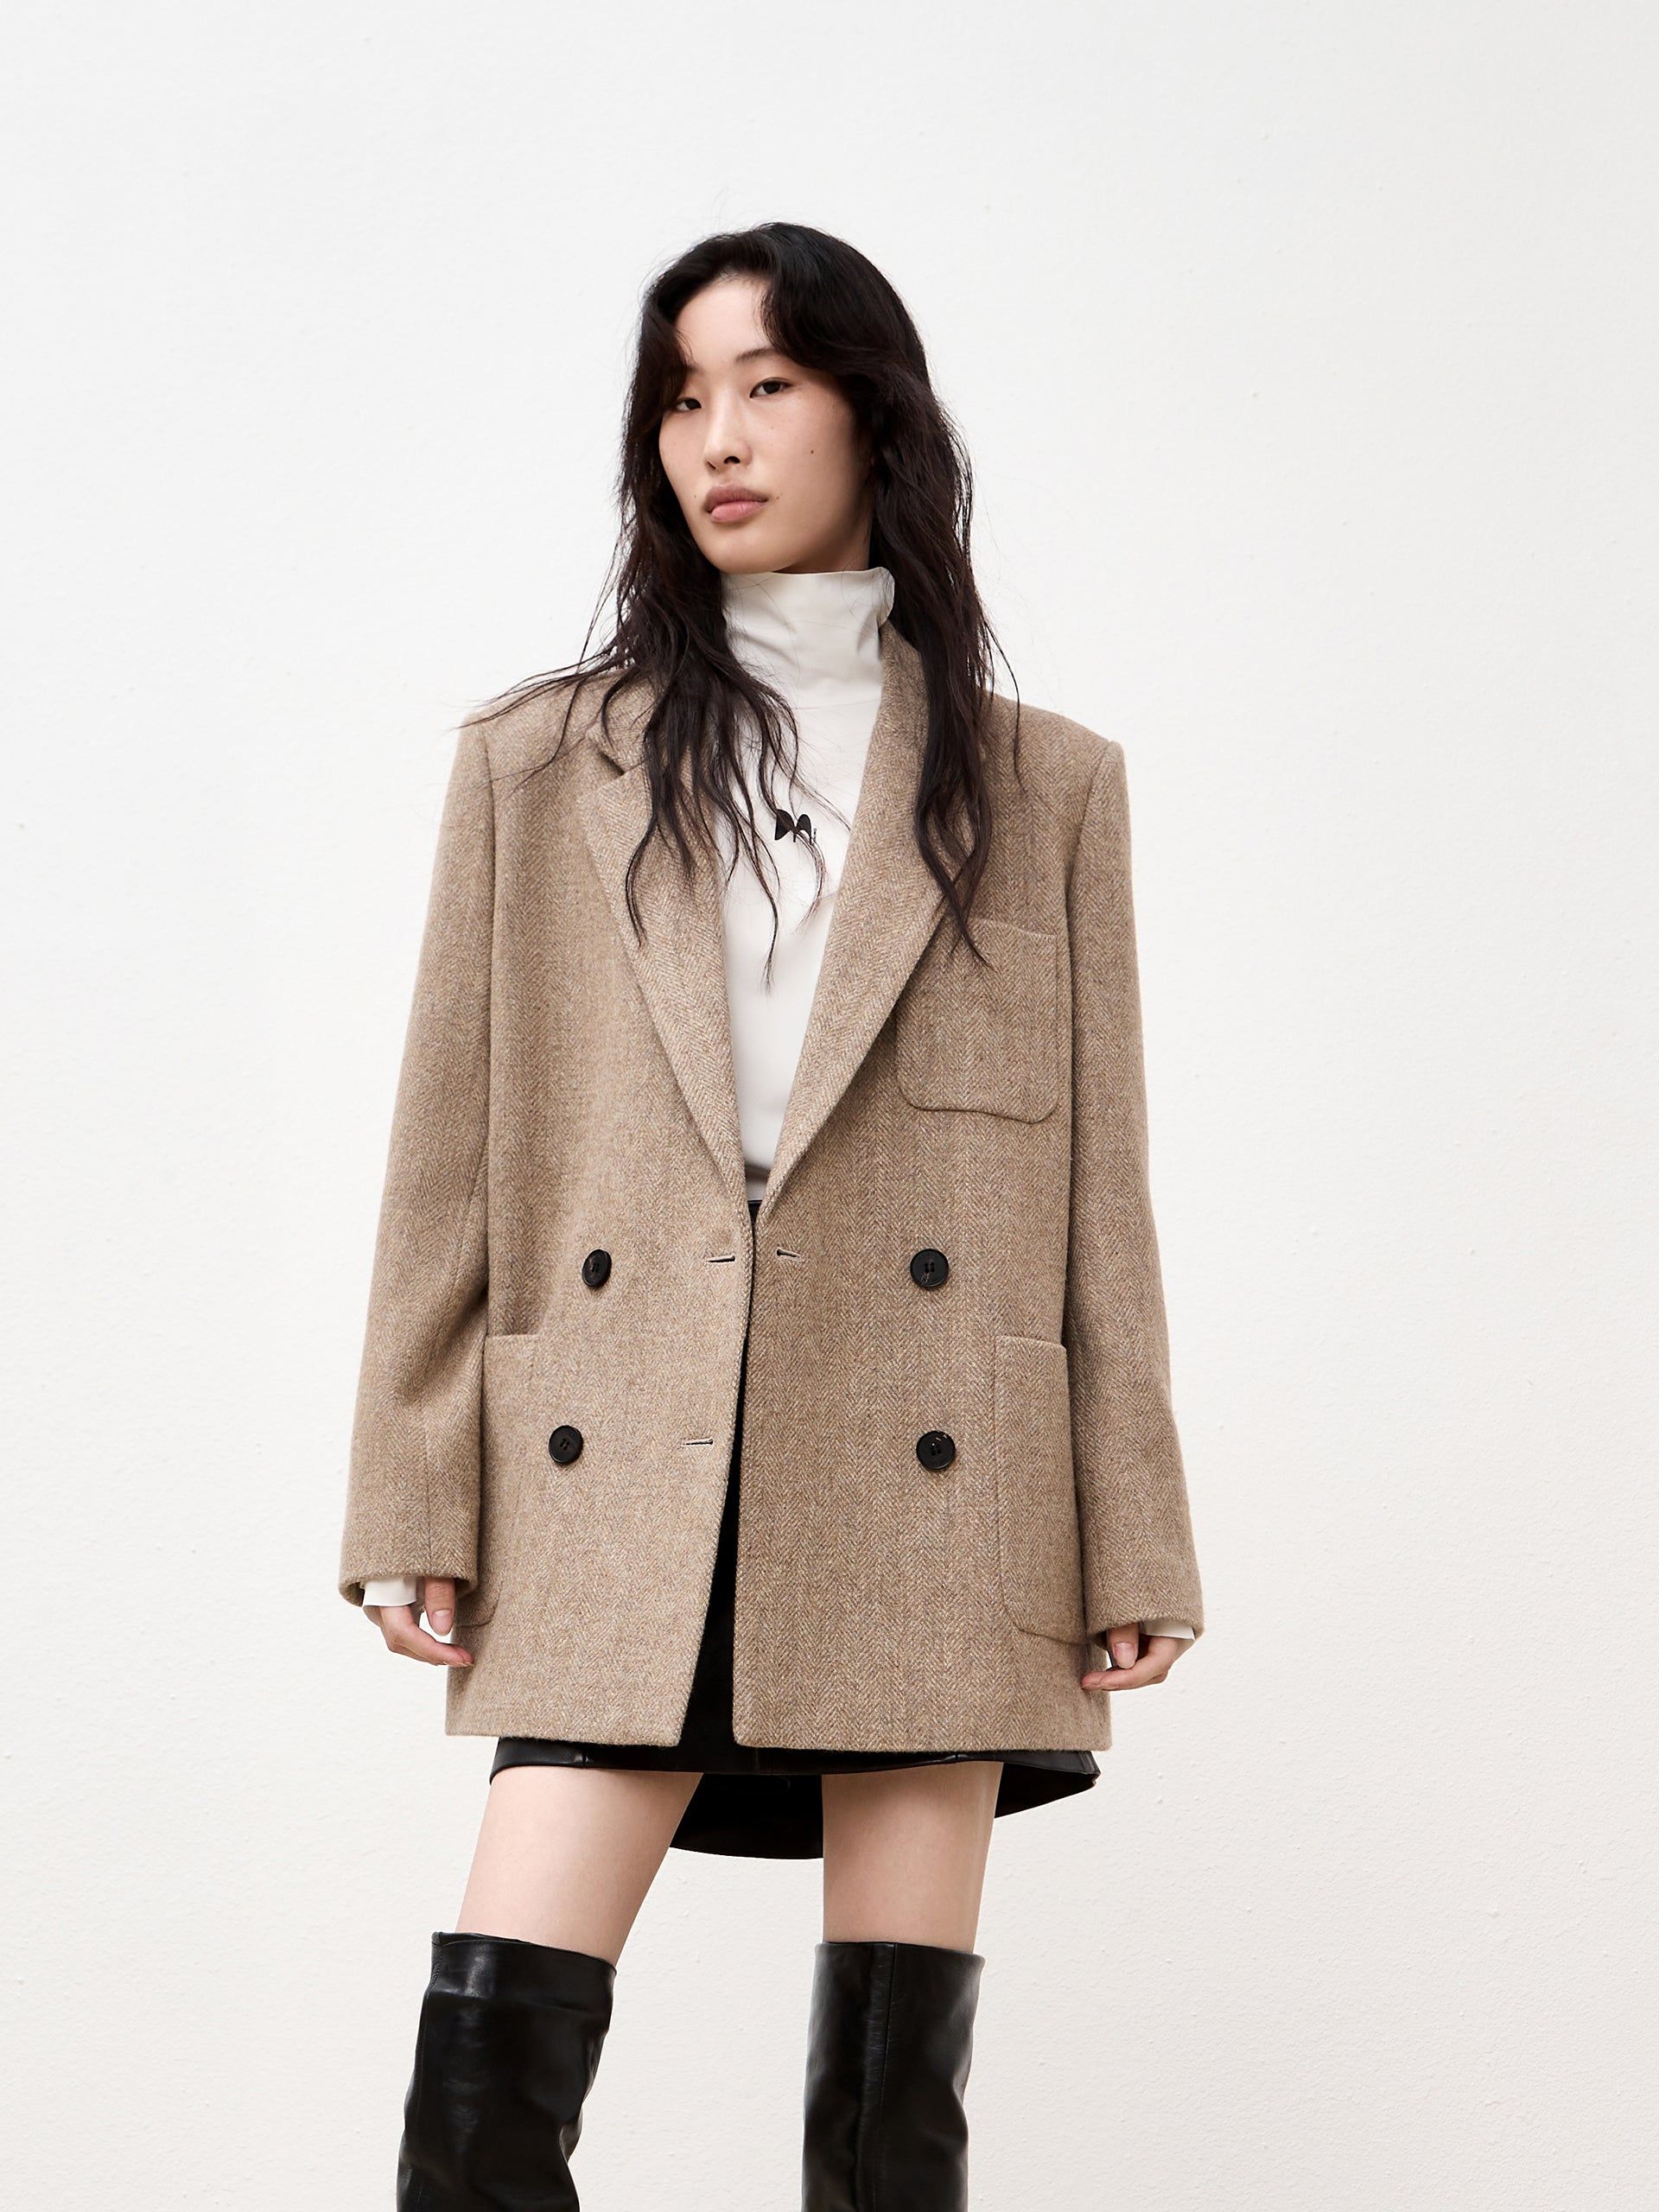 Wool Blazers: Cozy and Chic Outerwear for Every Occasion